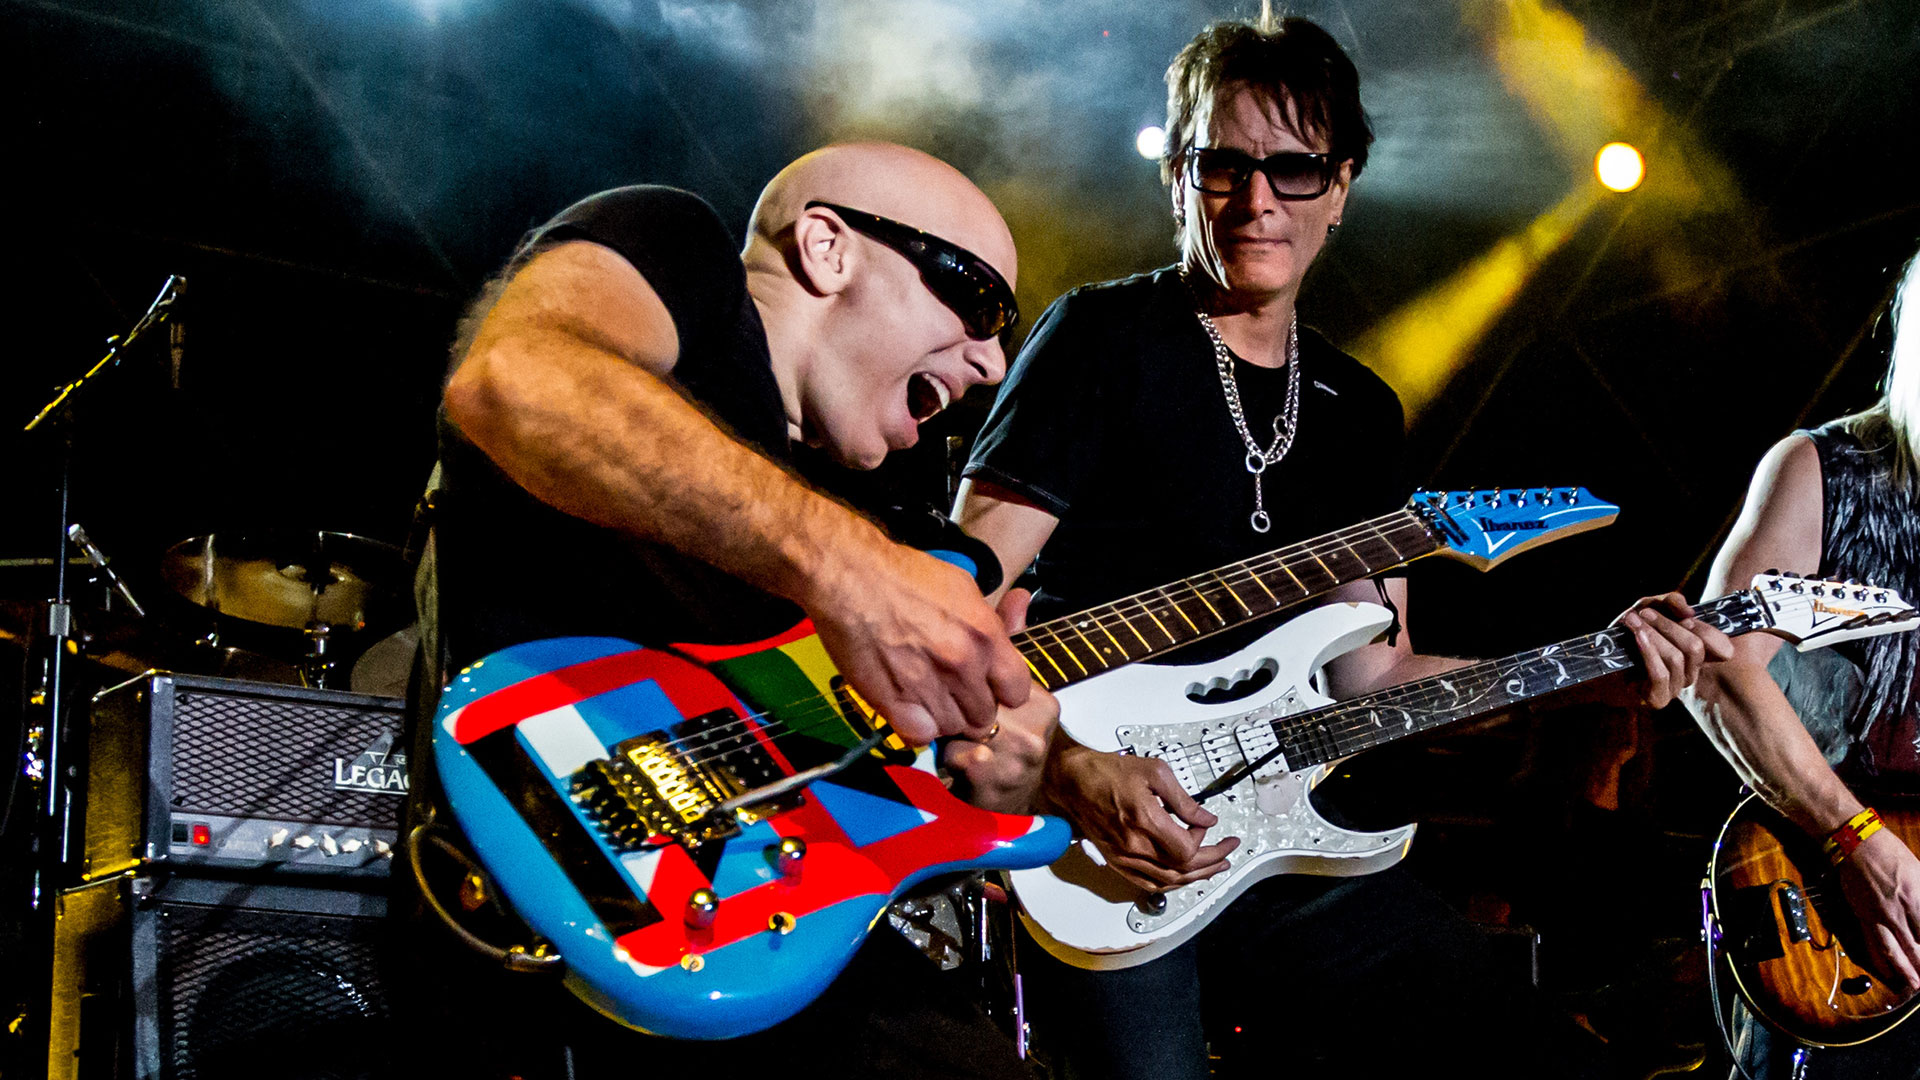 Satch/Vai tour: Joe Satriani and Steve Vai team up for dates and new music